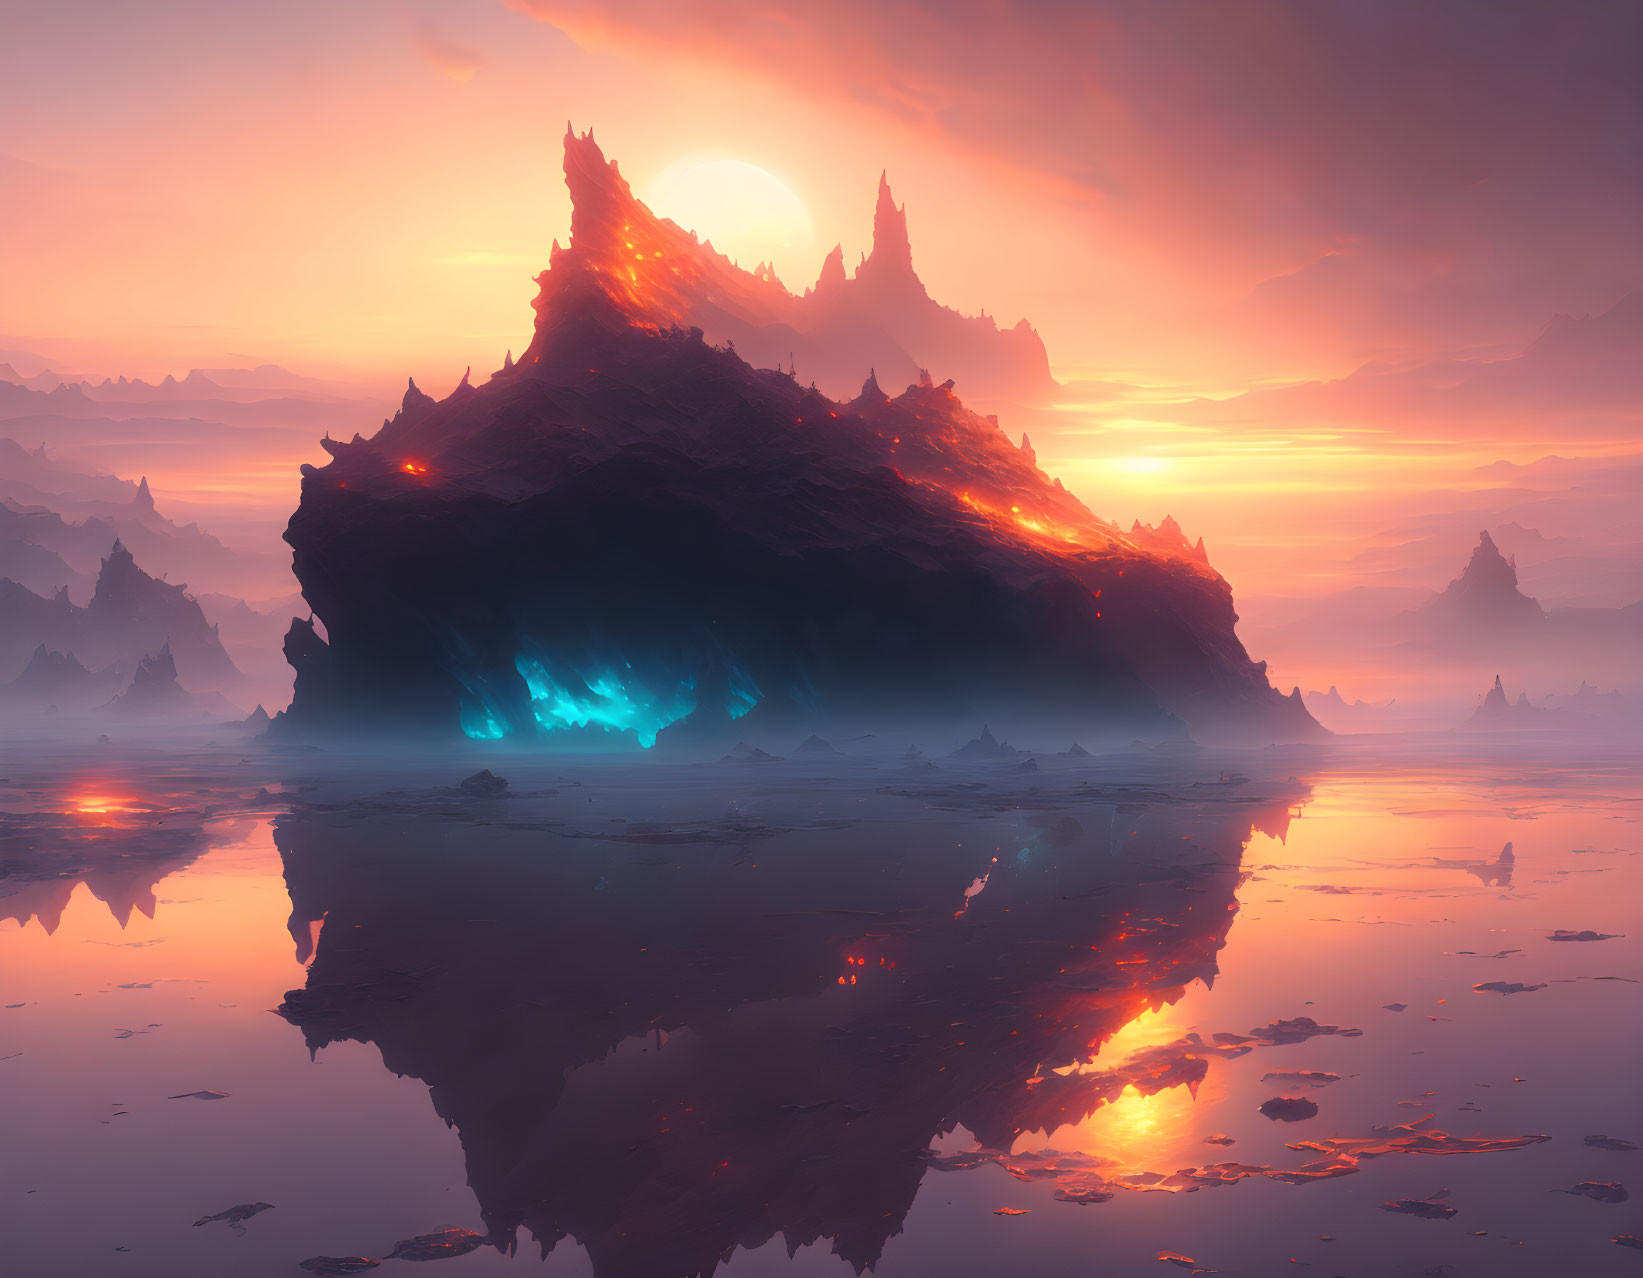 Mystical landscape with glowing blue cave, dark mountain range, pink sky, and twin suns